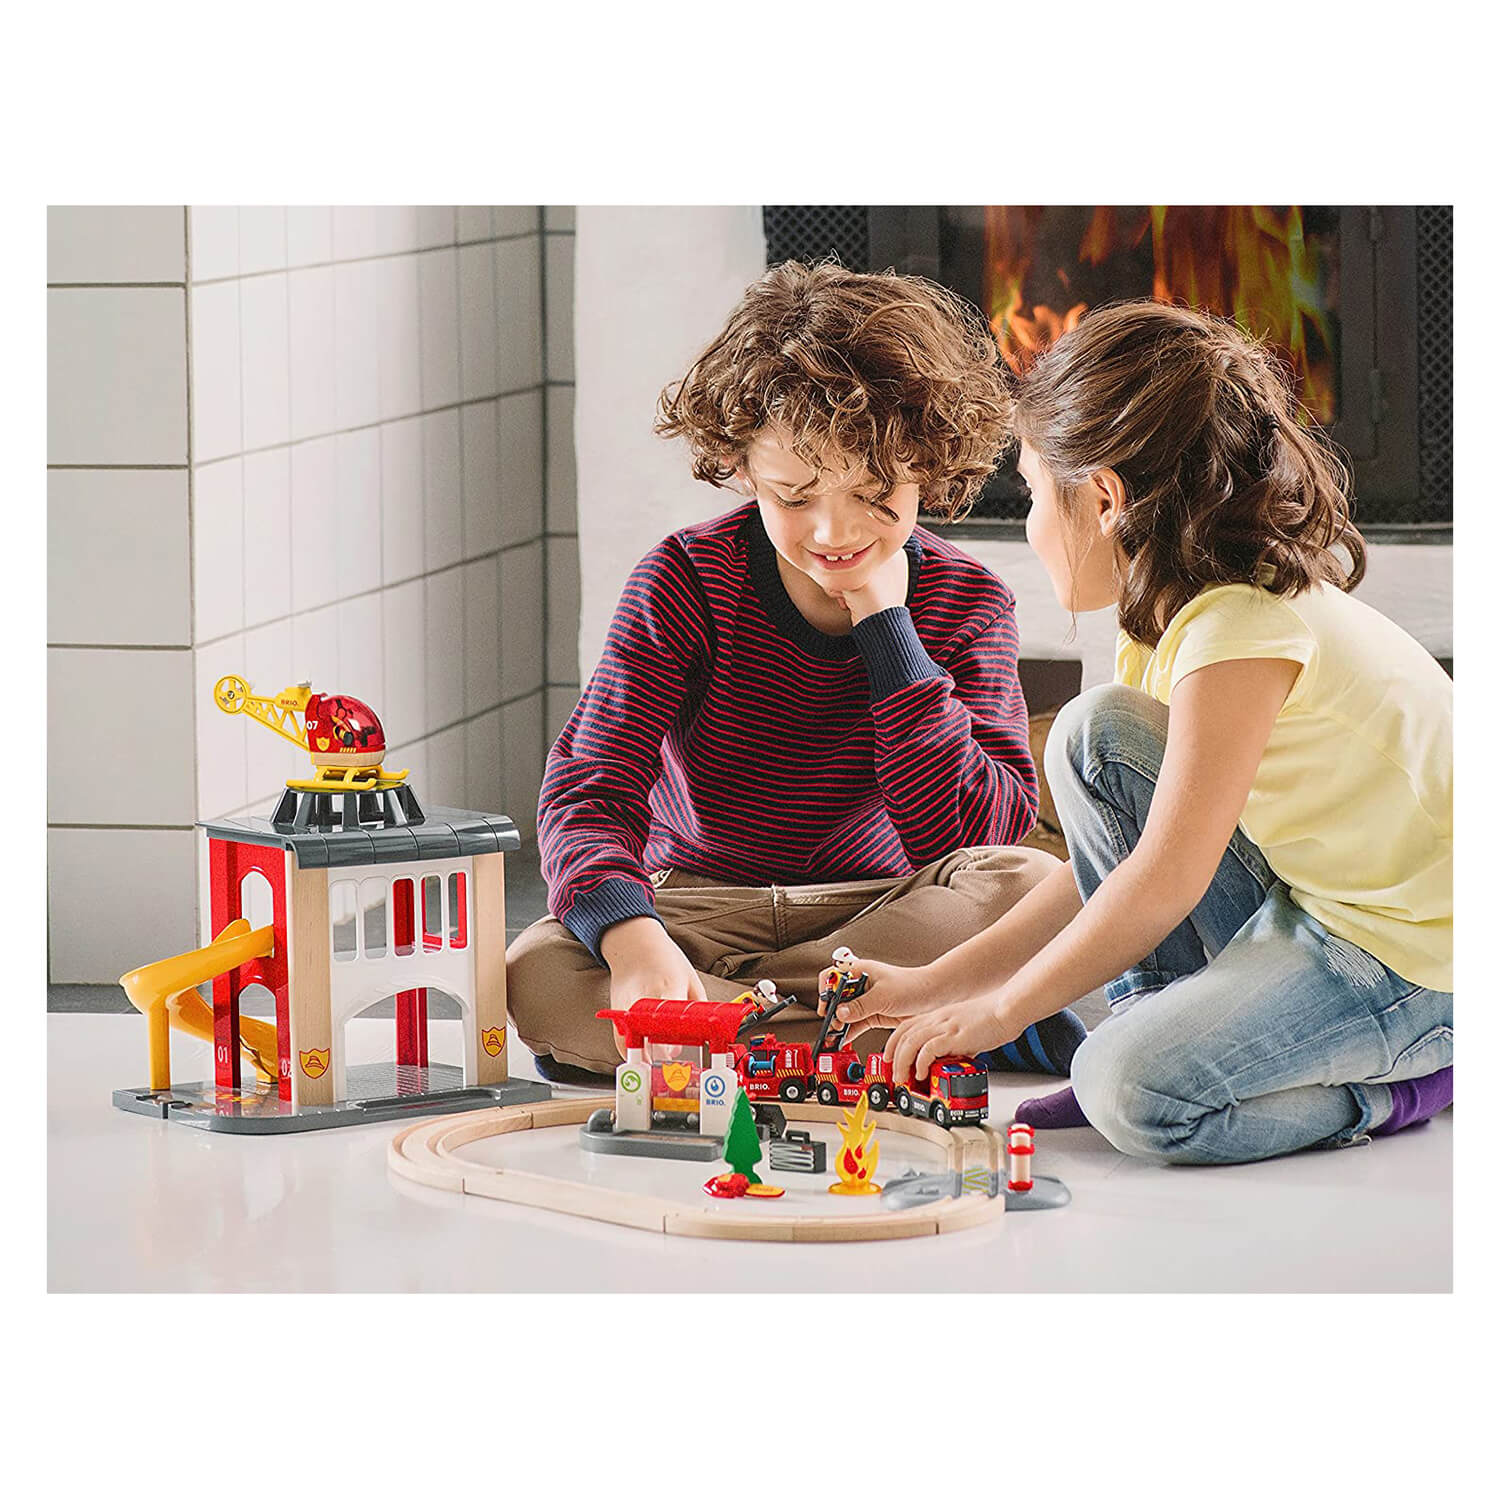 Kids playing with their fire station playset.